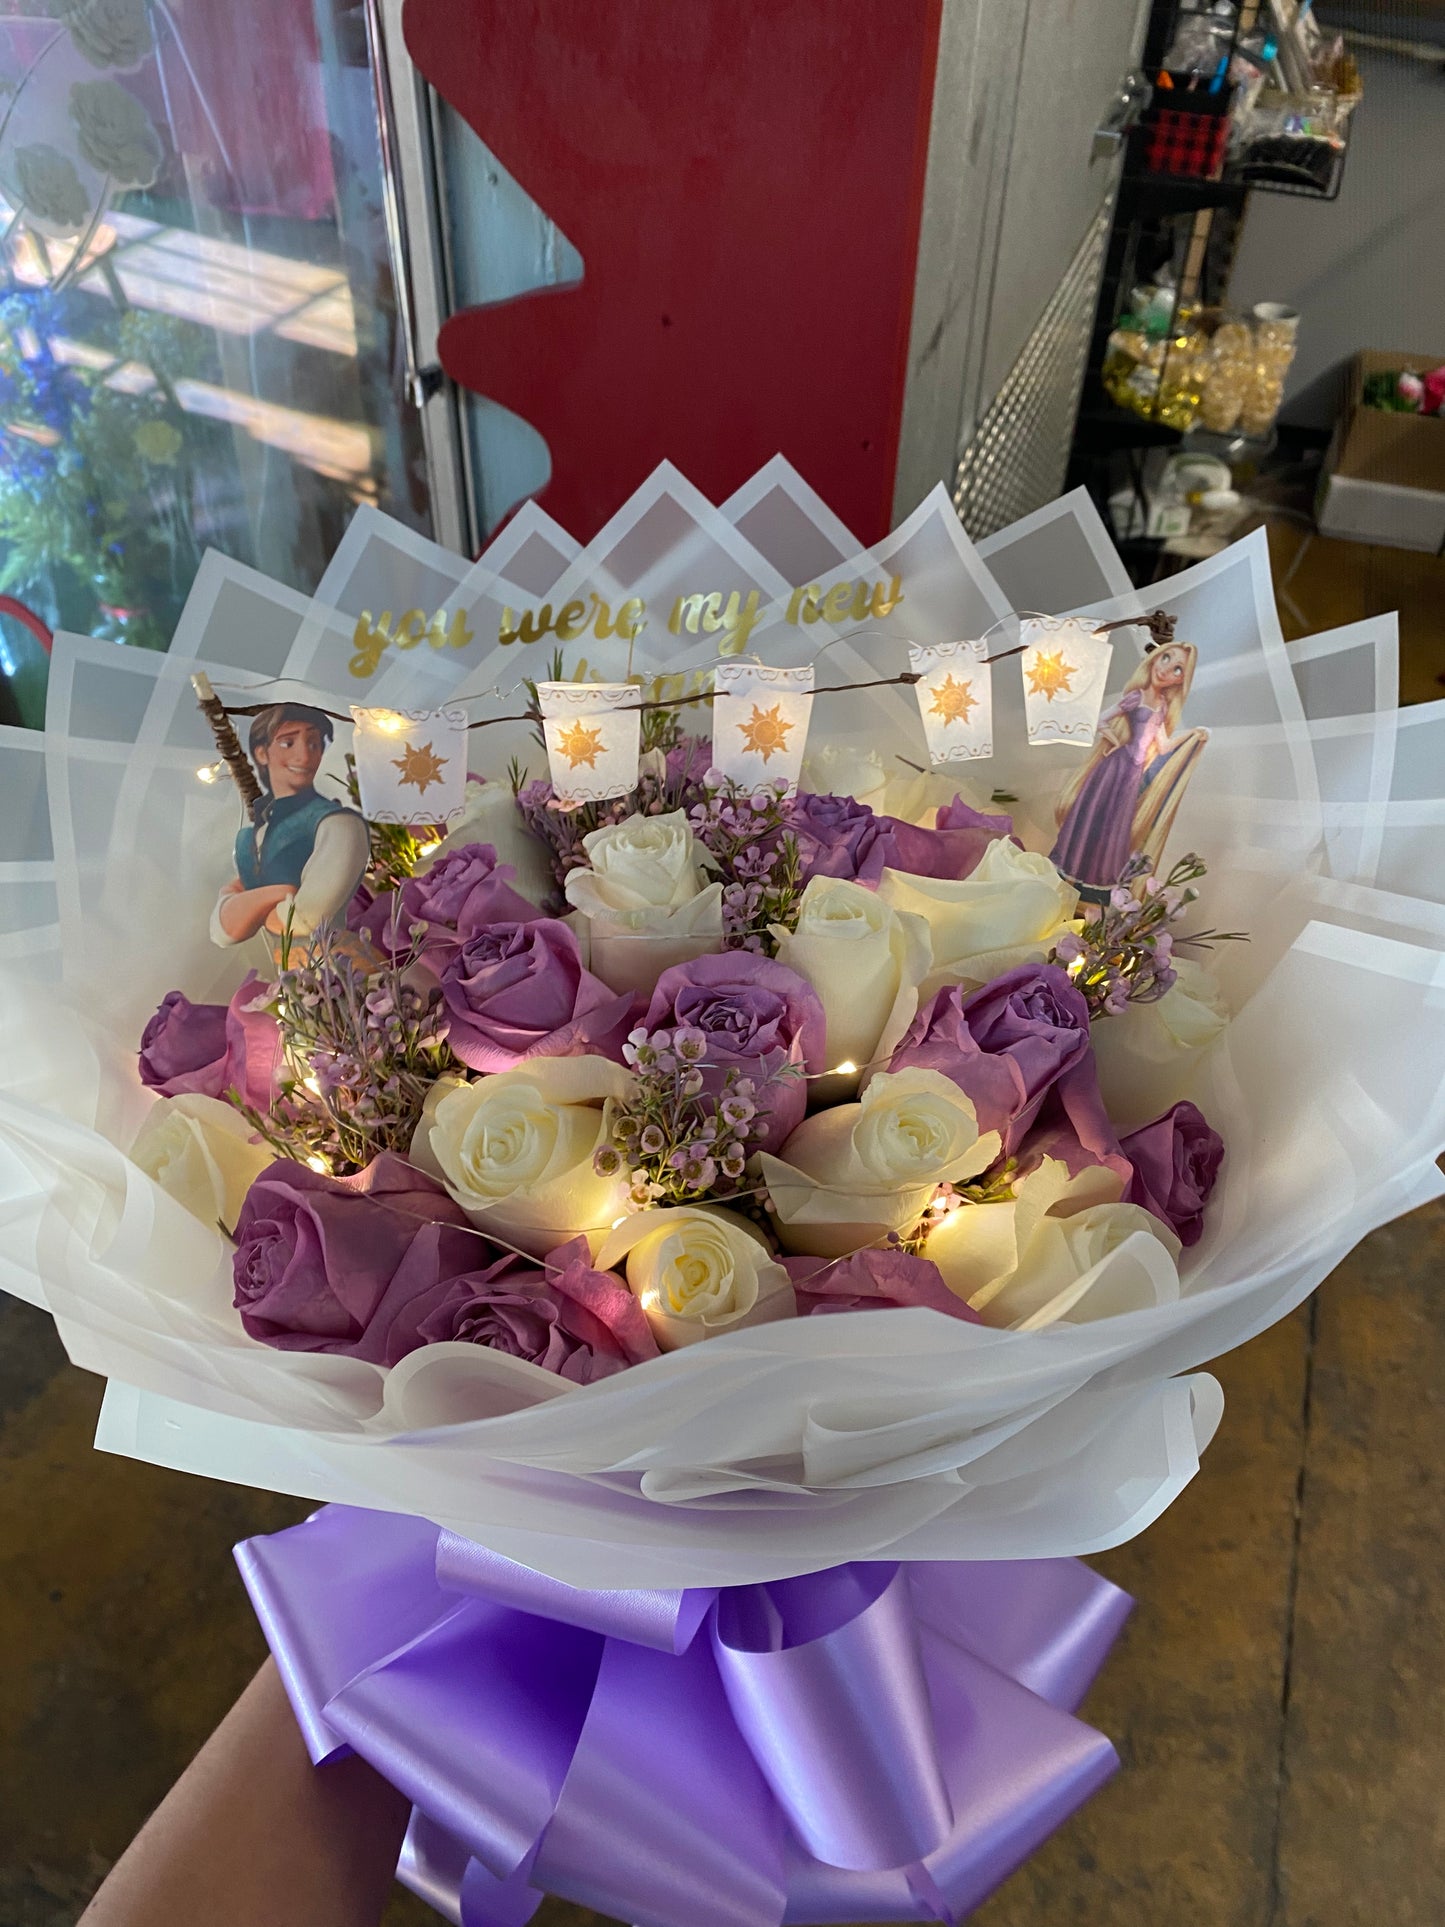 Magical light up bouquet for my princess 💜